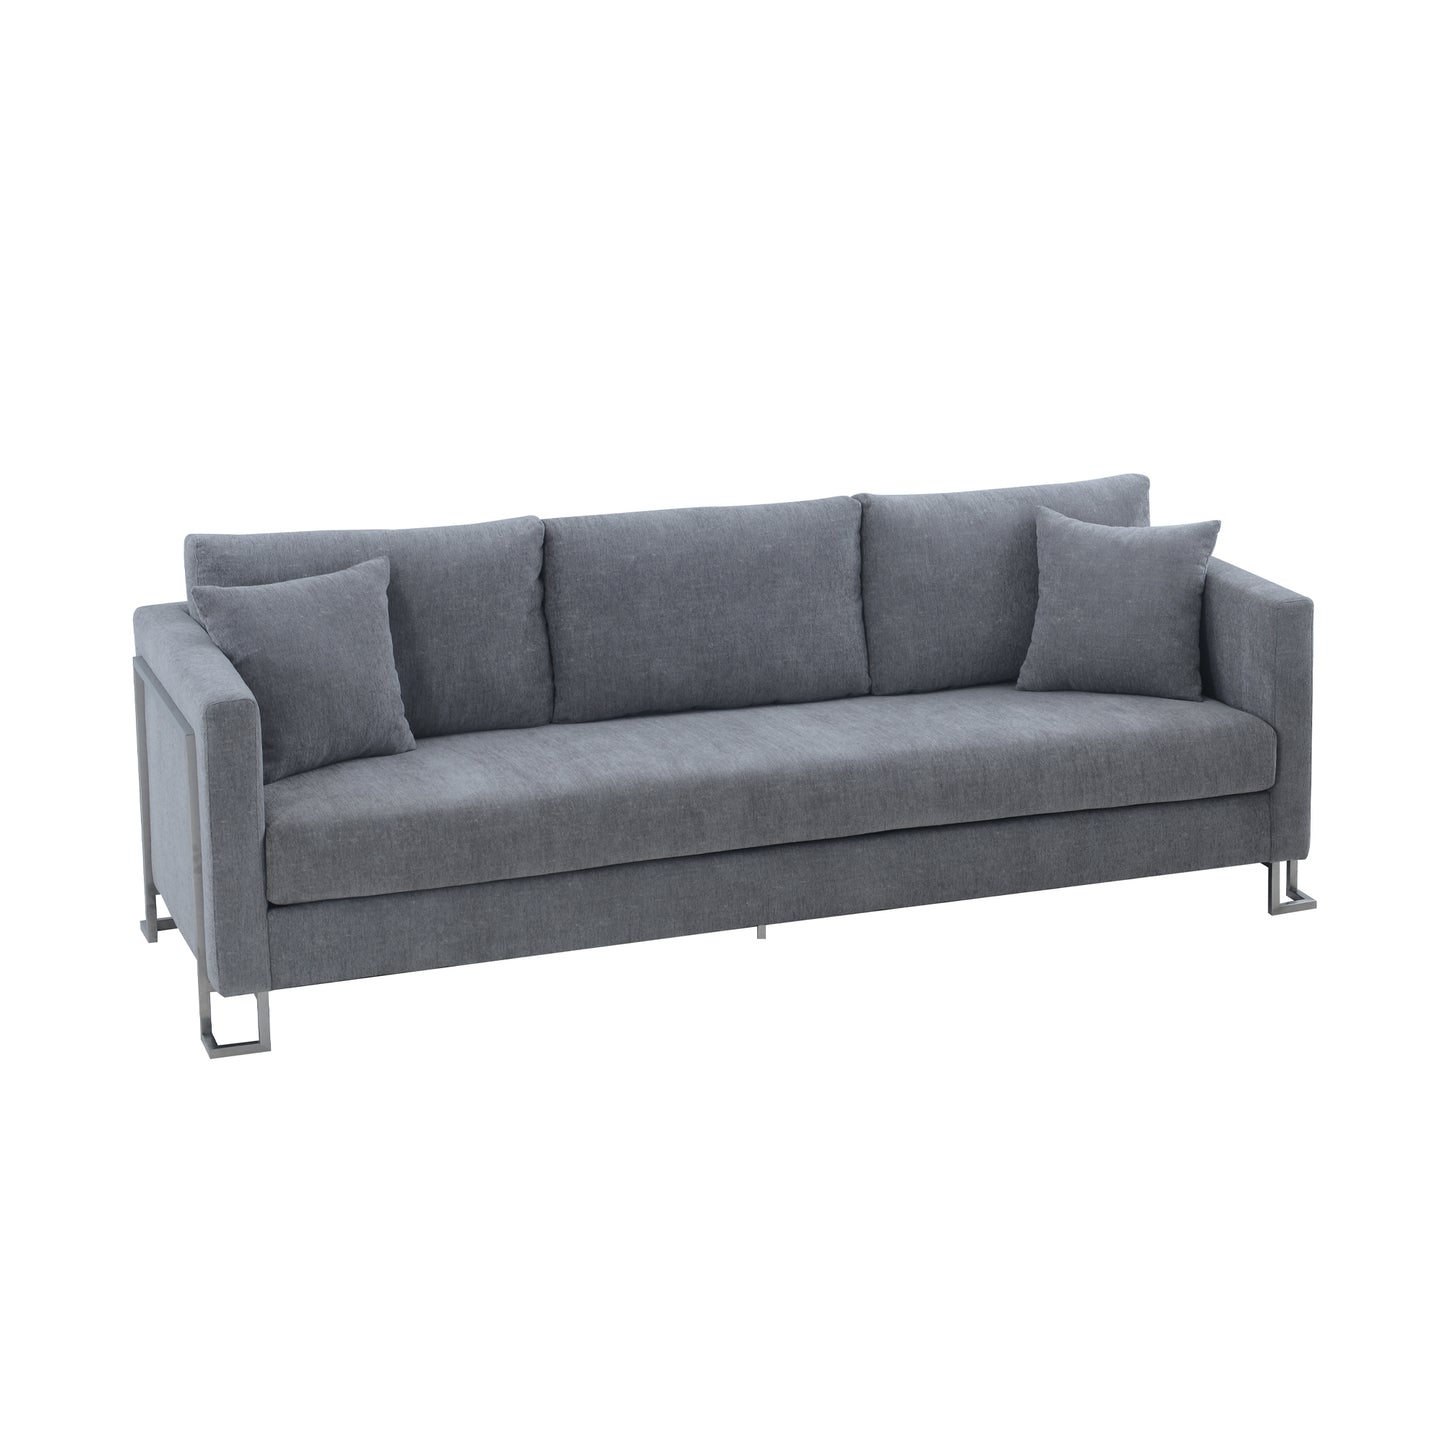 Heritage Gray Fabric Upholstered Sofa with Brushed Stainless Steel Legs